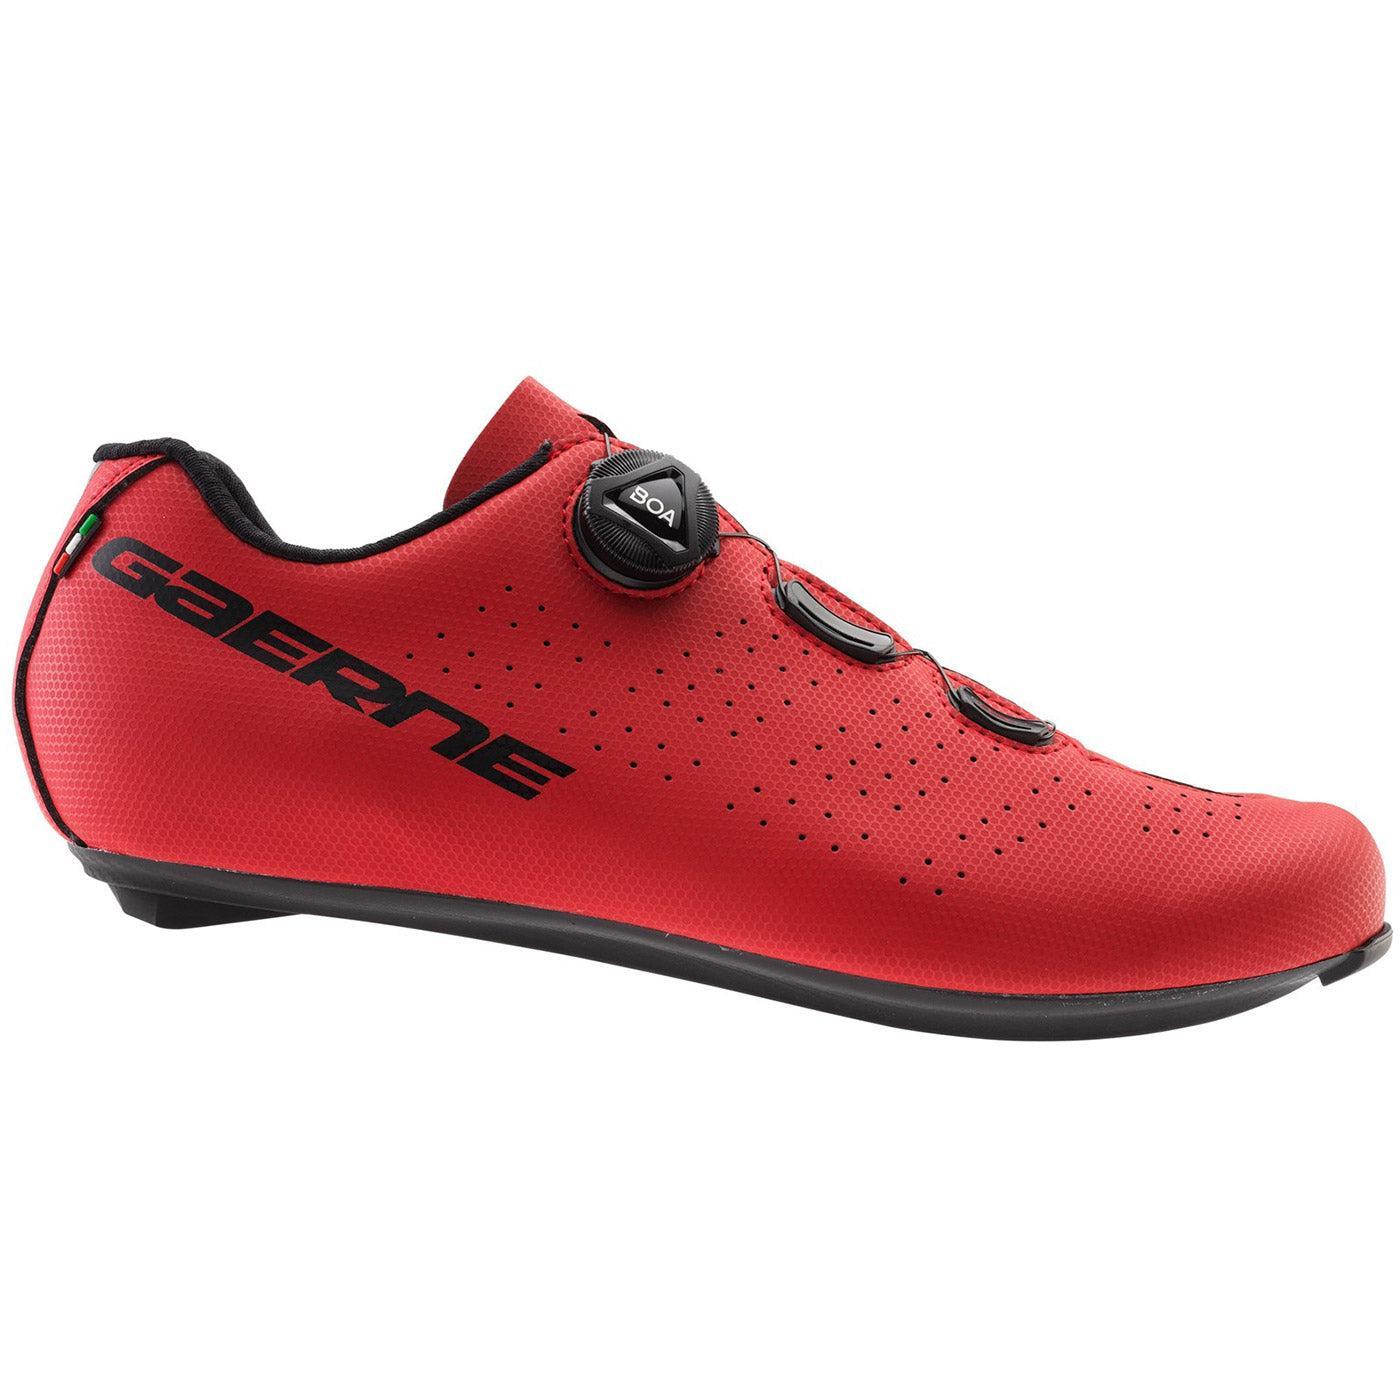 Chaussures Route G Sprint Mat Red Gaerne